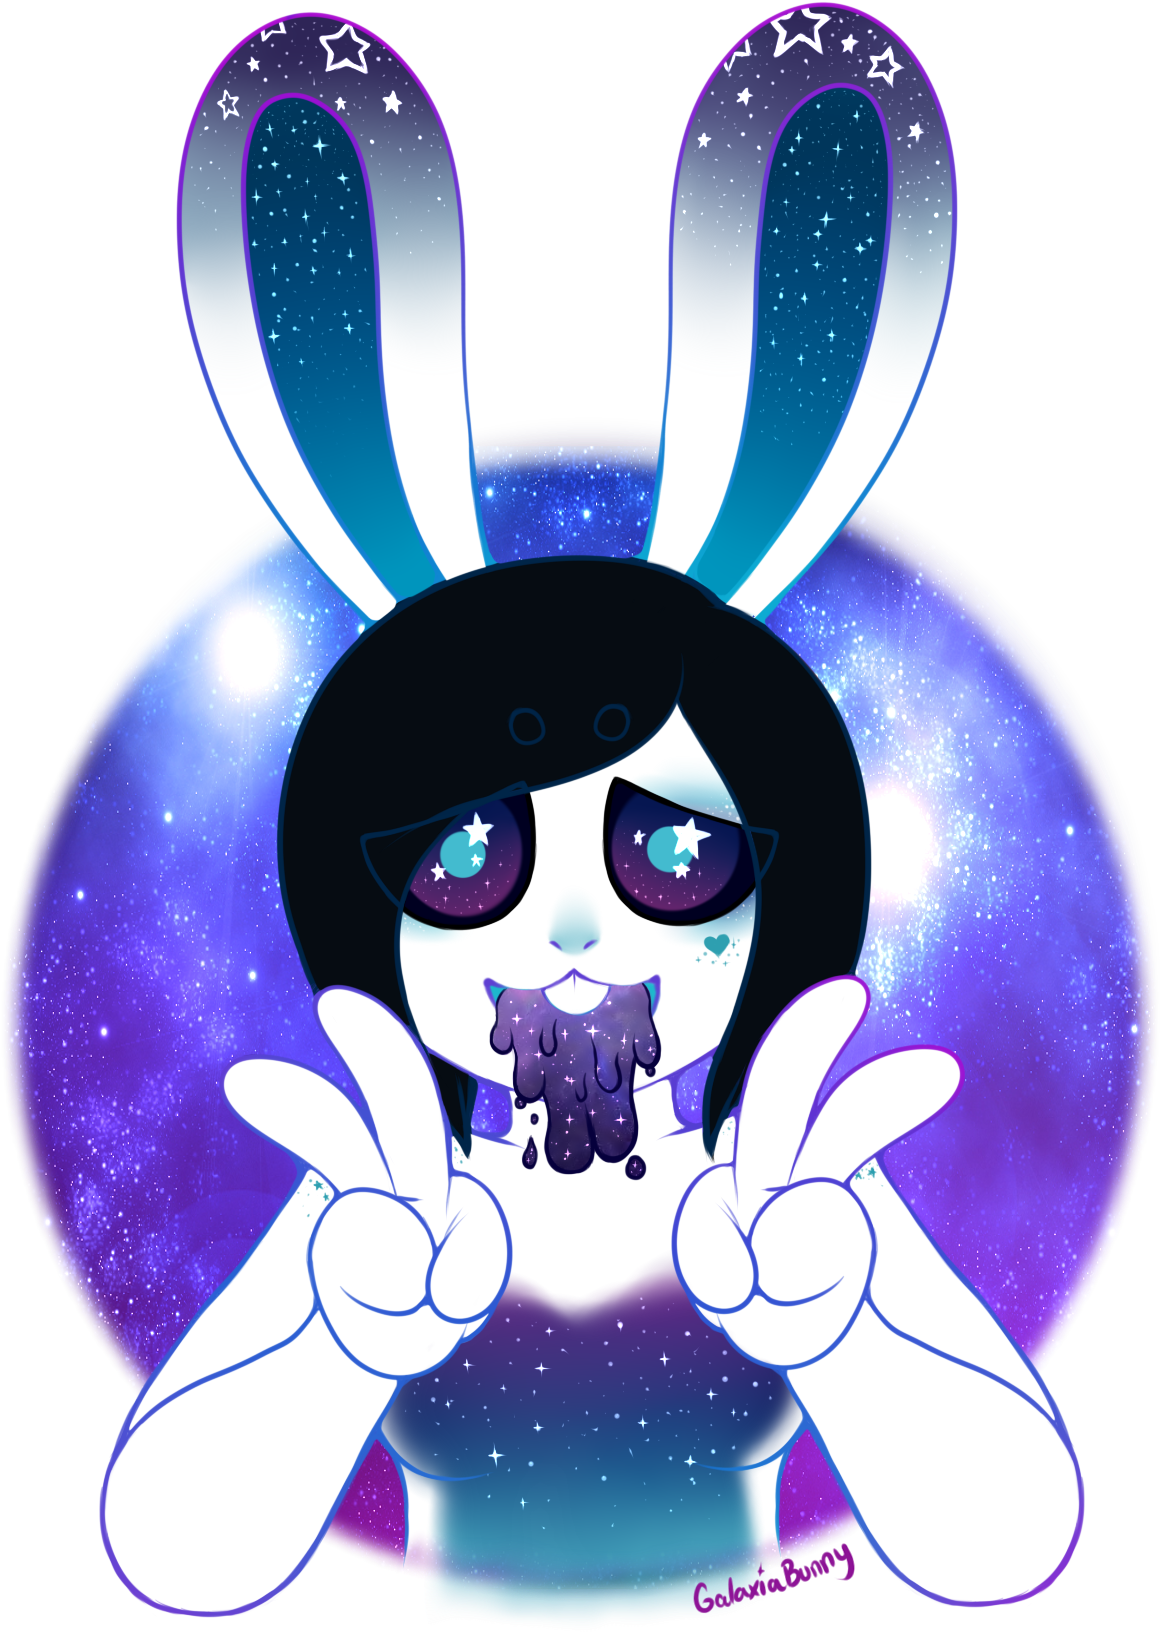 Puking Out The Galaxy - Galaxia Bunny (1289x1693)